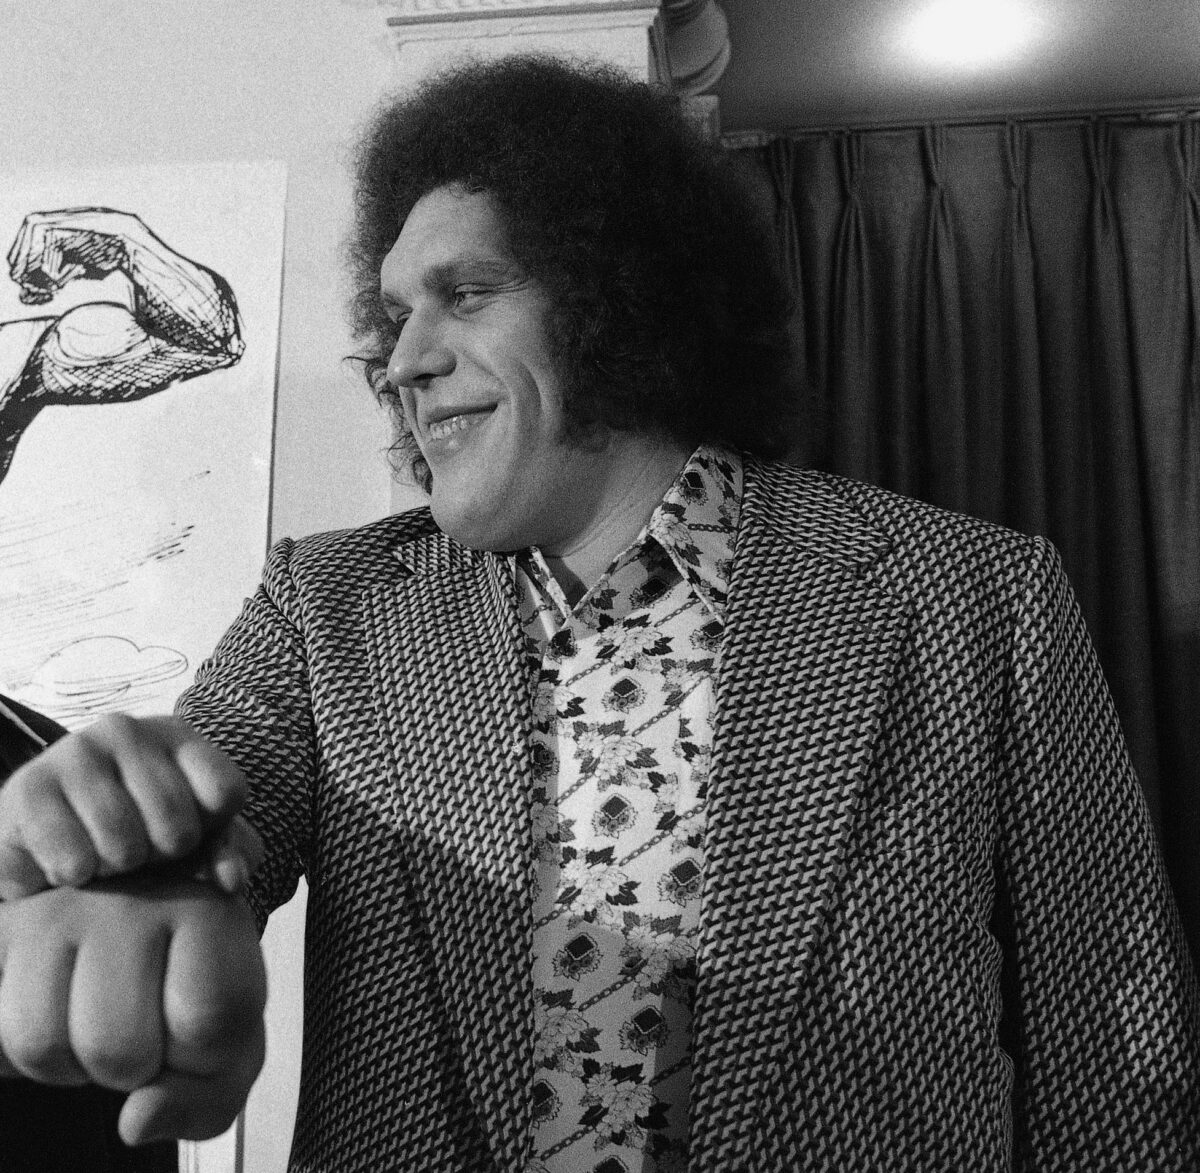 Must see throwback: Joe Theismann with Andre the Giant